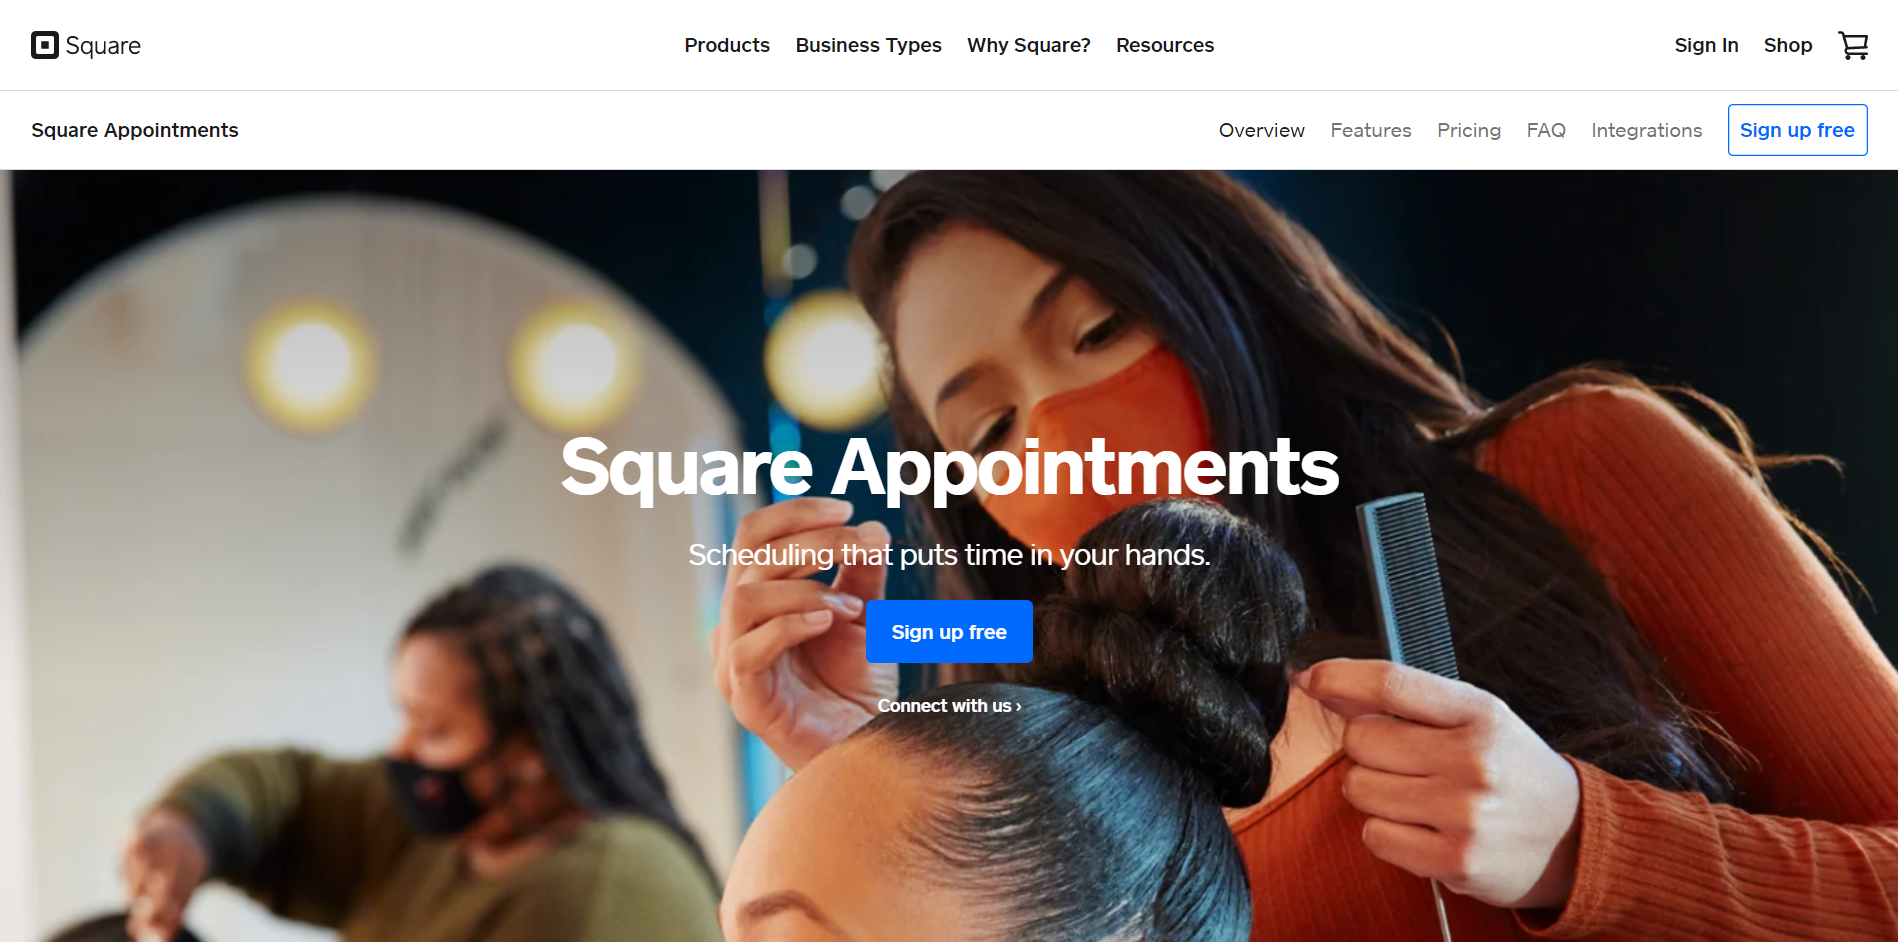 Square Appointments Main Page